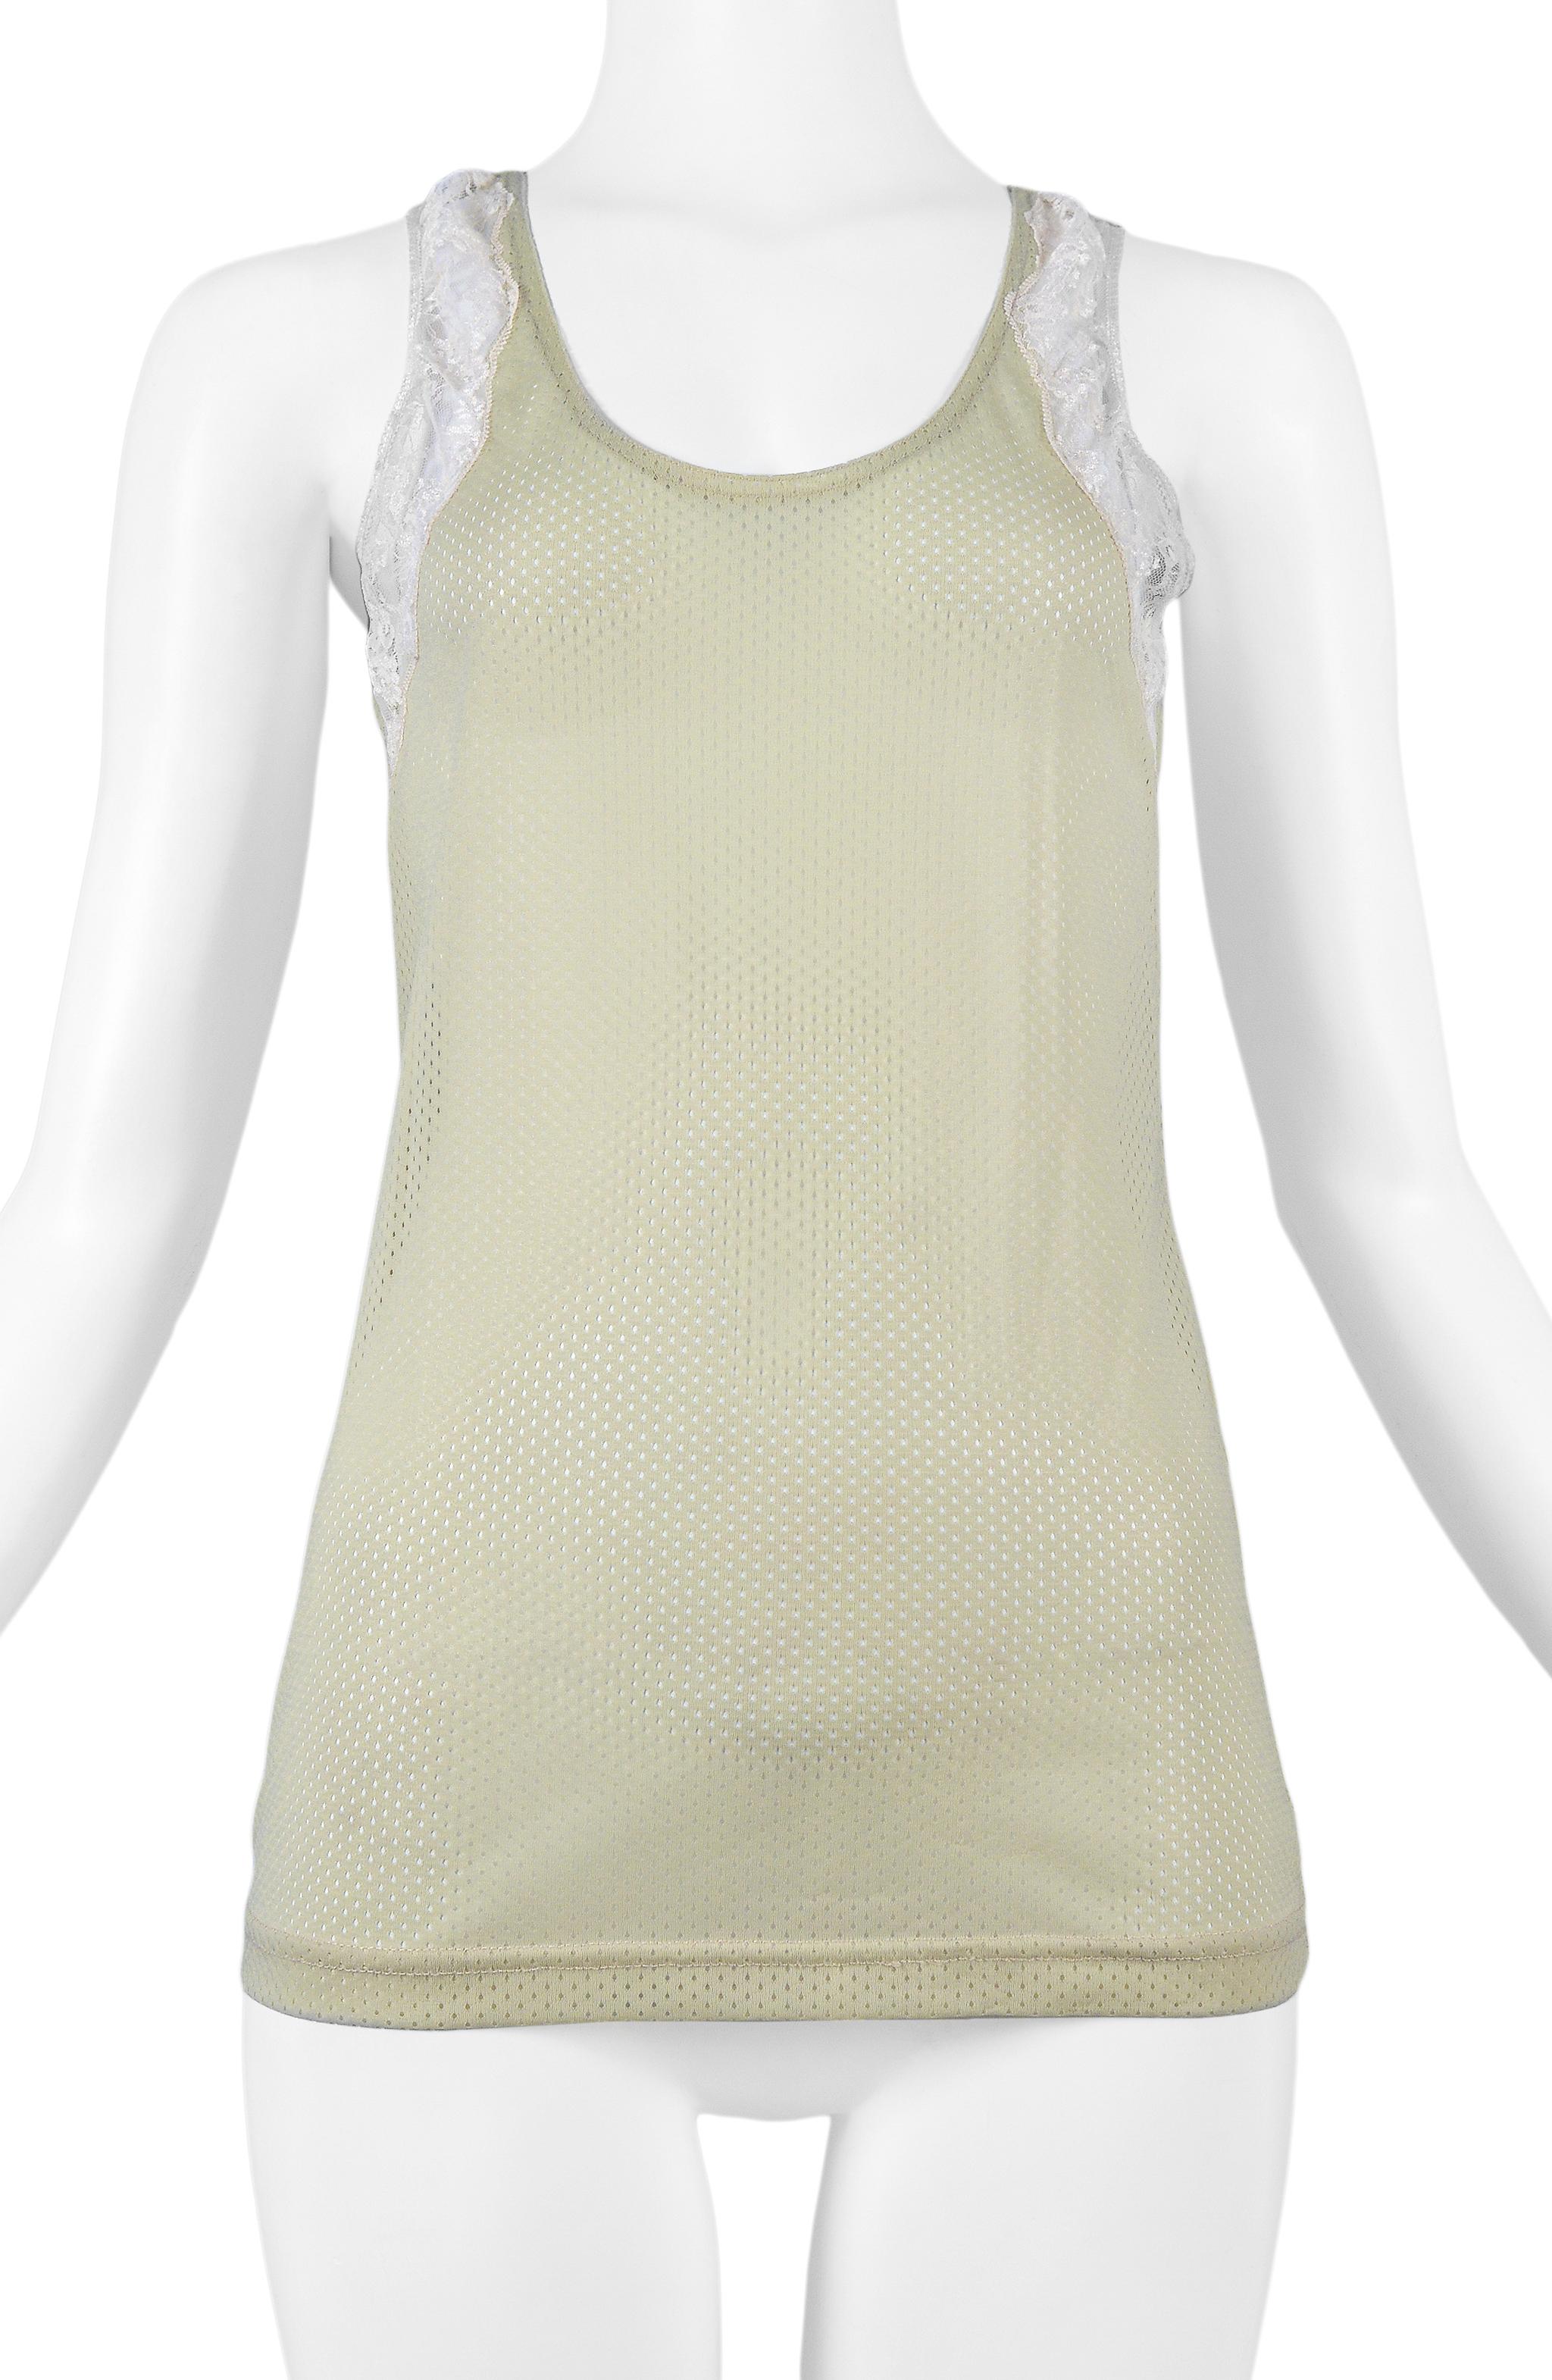 Resurrection Vintage is excited to offer a vintage Helmut Lang khaki tank top featuring sports mesh fabric, a scoop neckline, straps with lace trim, and hip length body. 

Helmut Lang 
Size Small
Mesh Lace 
Excellent Vintage Condition 
Authenticity